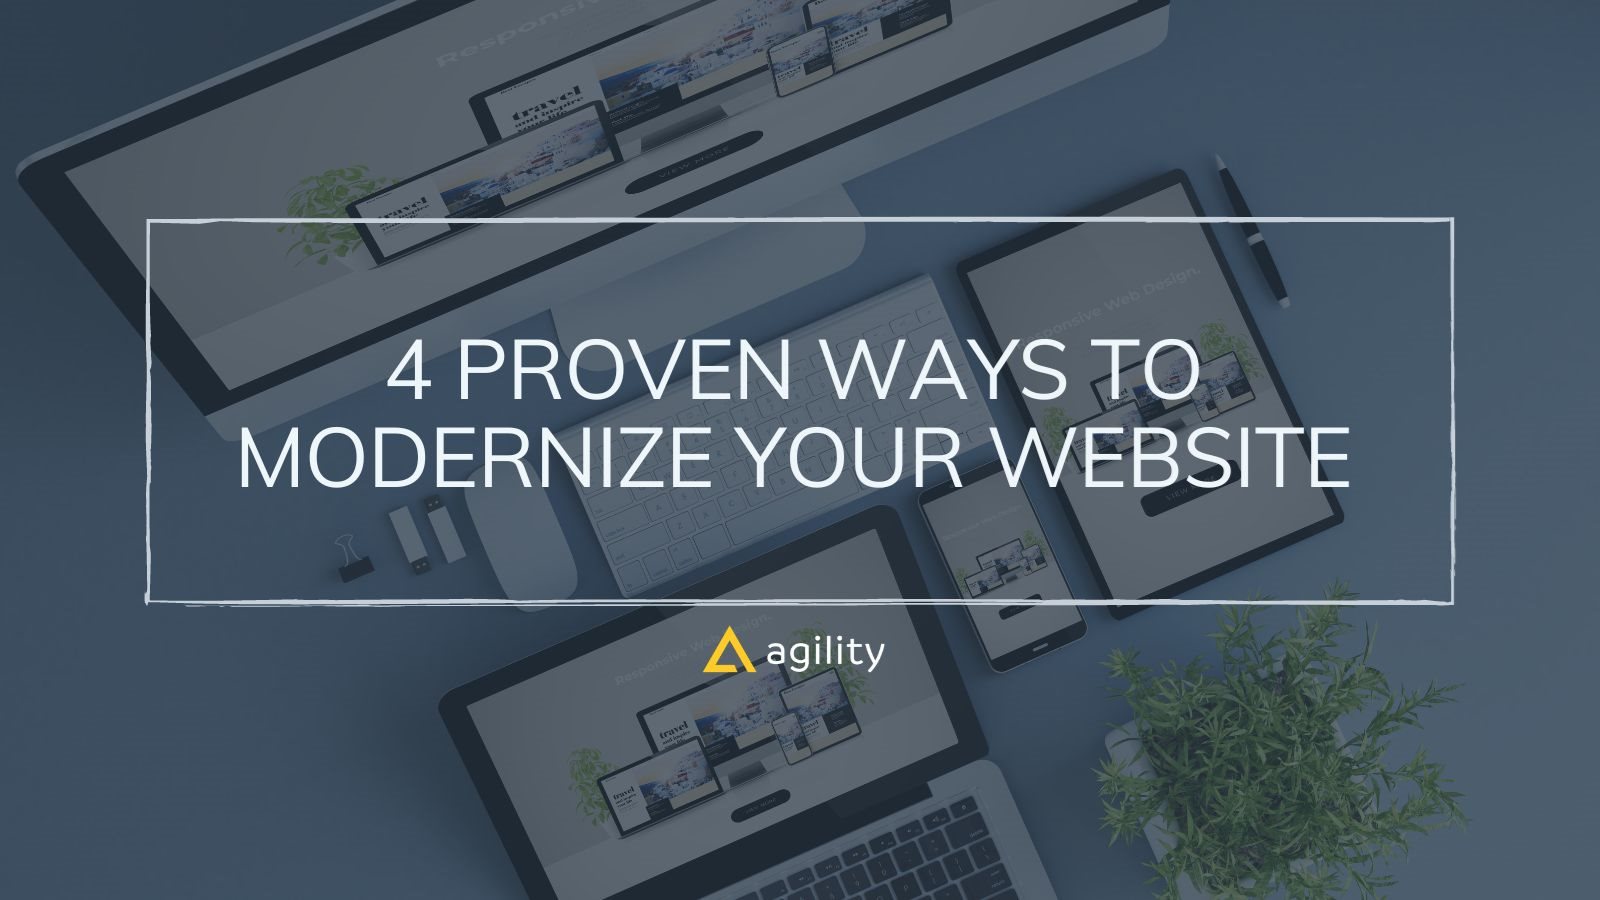 4 Proven Ways to Modernize Your Website